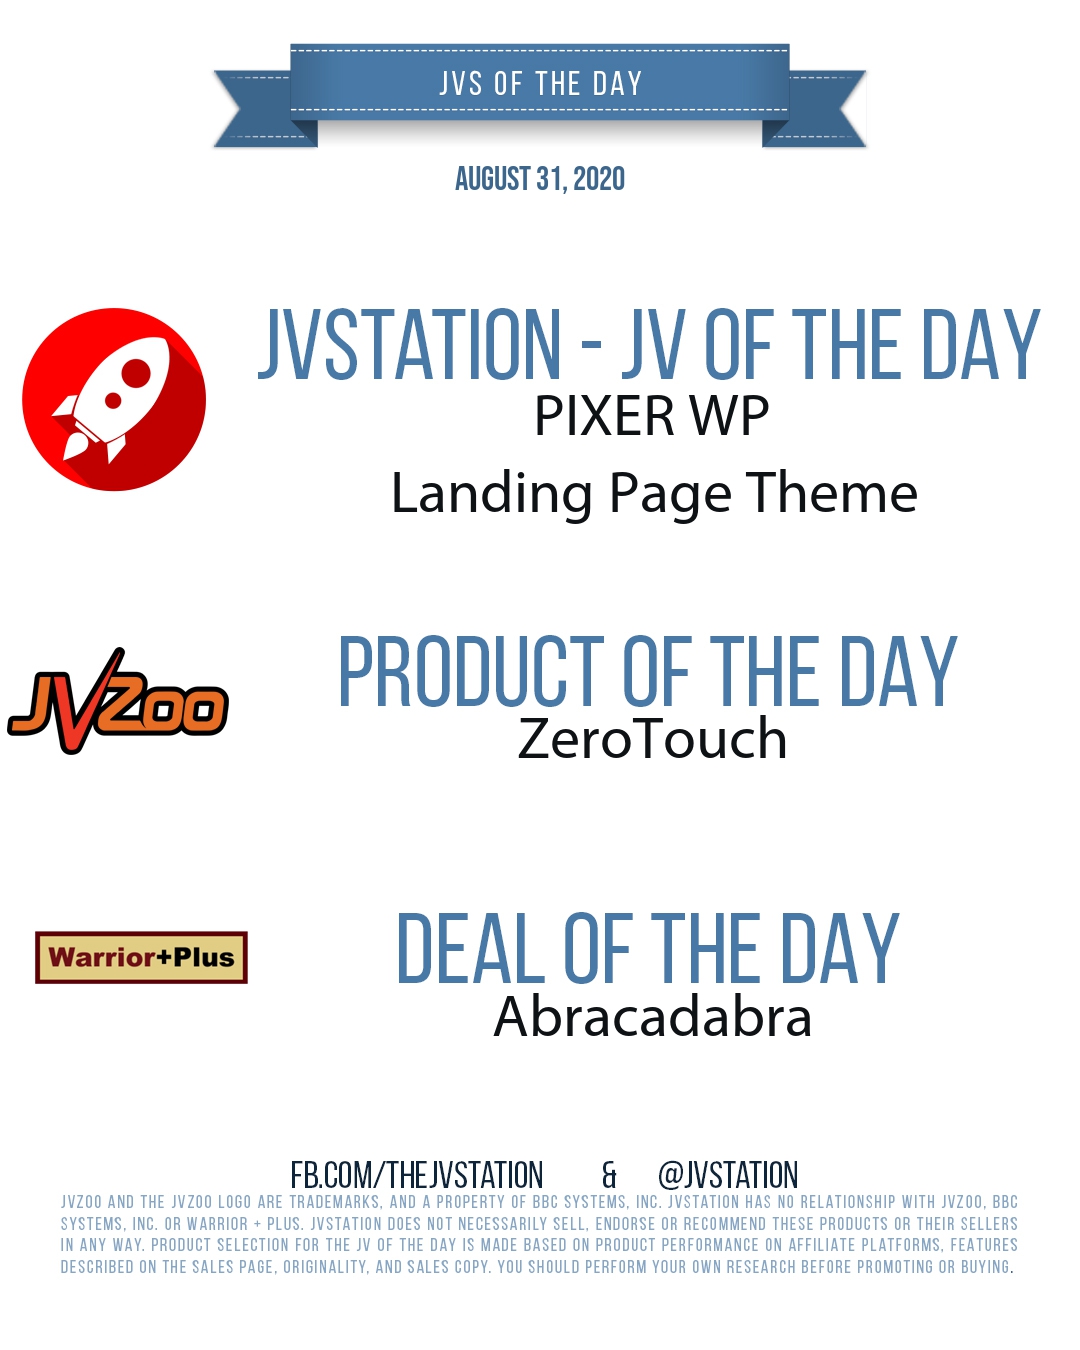 JVs of the day - August 31, 2020